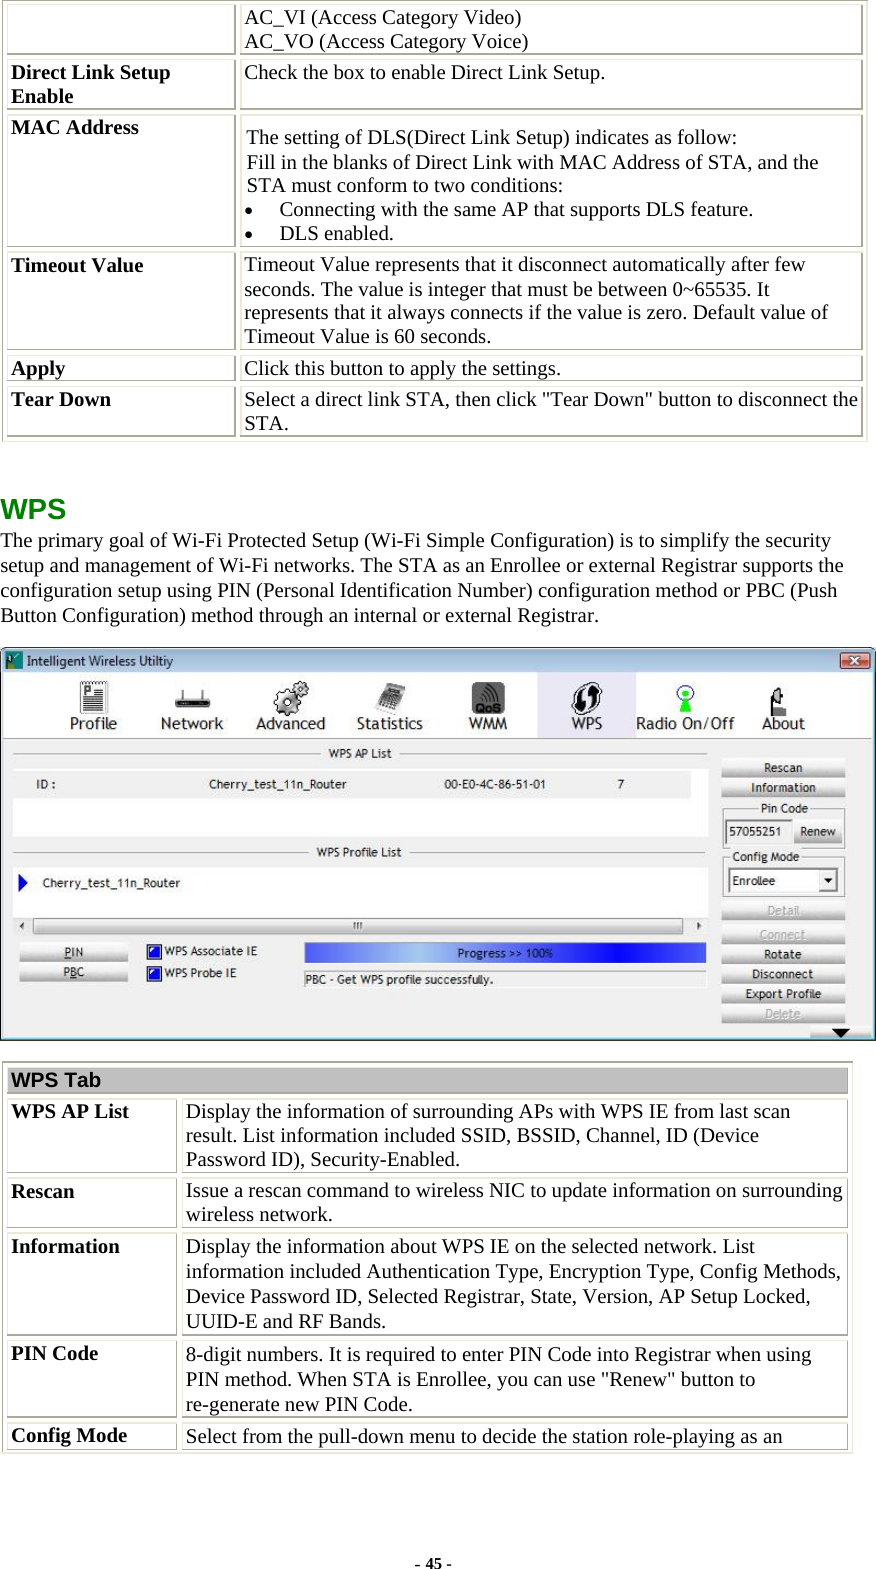  AC_VI (Access Category Video) AC_VO (Access Category Voice) Direct Link Setup Enable  Check the box to enable Direct Link Setup. MAC Address  The setting of DLS(Direct Link Setup) indicates as follow:   Fill in the blanks of Direct Link with MAC Address of STA, and the STA must conform to two conditions: • Connecting with the same AP that supports DLS feature. • DLS enabled. Timeout Value  Timeout Value represents that it disconnect automatically after few seconds. The value is integer that must be between 0~65535. It represents that it always connects if the value is zero. Default value of Timeout Value is 60 seconds. Apply  Click this button to apply the settings. Tear Down  Select a direct link STA, then click &quot;Tear Down&quot; button to disconnect the STA.  WPS The primary goal of Wi-Fi Protected Setup (Wi-Fi Simple Configuration) is to simplify the security setup and management of Wi-Fi networks. The STA as an Enrollee or external Registrar supports the configuration setup using PIN (Personal Identification Number) configuration method or PBC (Push Button Configuration) method through an internal or external Registrar.  WPS Tab WPS AP List  Display the information of surrounding APs with WPS IE from last scan result. List information included SSID, BSSID, Channel, ID (Device Password ID), Security-Enabled. Rescan  Issue a rescan command to wireless NIC to update information on surrounding wireless network. Information  Display the information about WPS IE on the selected network. List information included Authentication Type, Encryption Type, Config Methods, Device Password ID, Selected Registrar, State, Version, AP Setup Locked, UUID-E and RF Bands. PIN Code  8-digit numbers. It is required to enter PIN Code into Registrar when using PIN method. When STA is Enrollee, you can use &quot;Renew&quot; button to re-generate new PIN Code. Config Mode  Select from the pull-down menu to decide the station role-playing as an - 45 - 